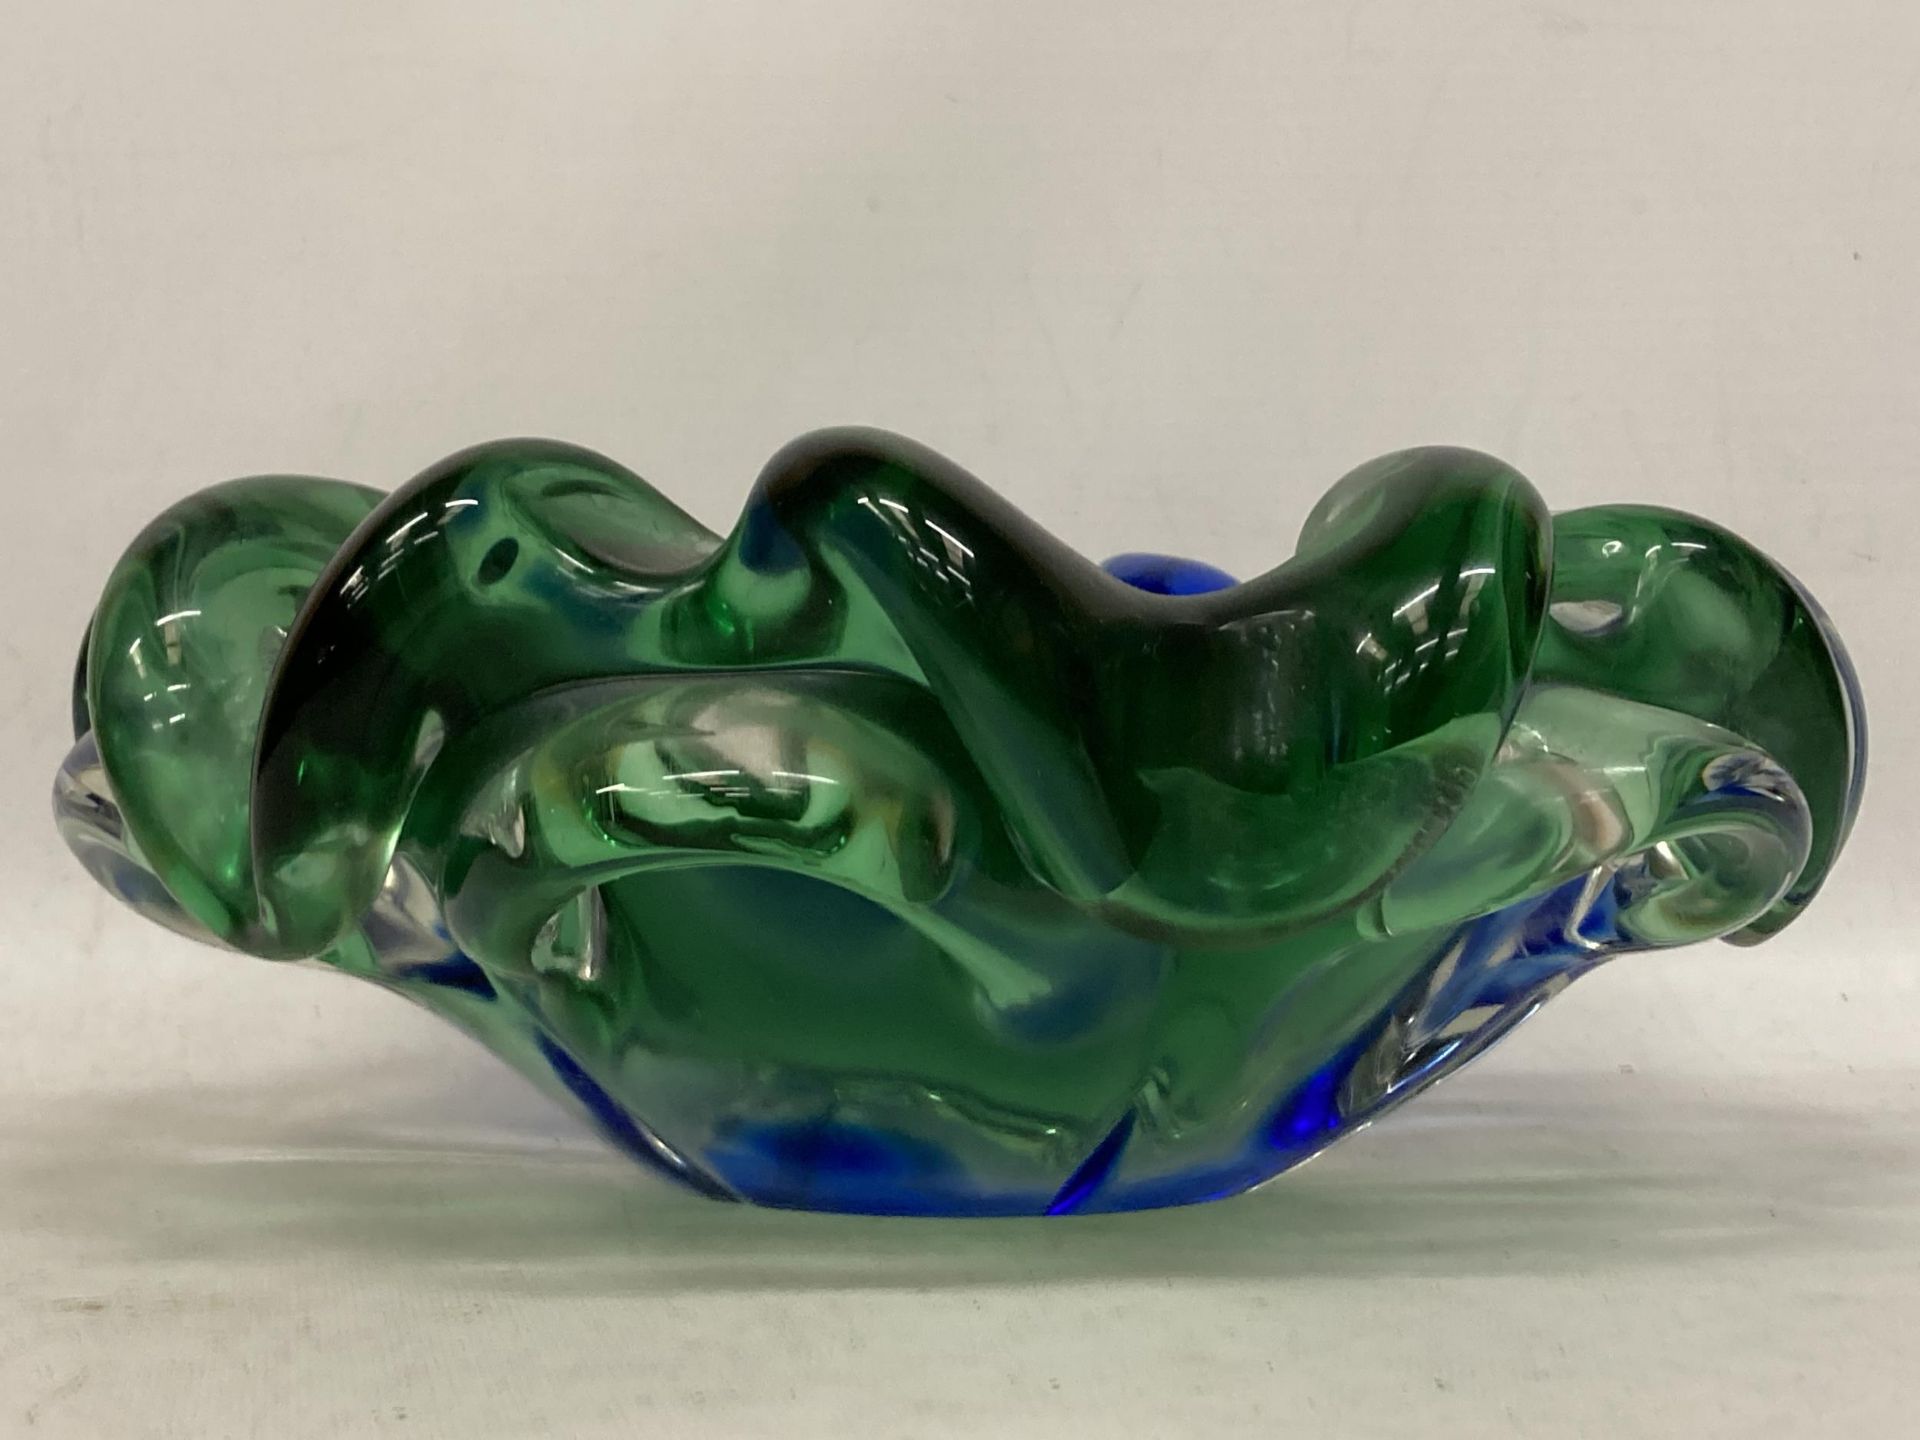 AN ITALIAN BLUE AND GREEN ART GLASS BOWL, POSSIBLY MURANO - Image 3 of 5